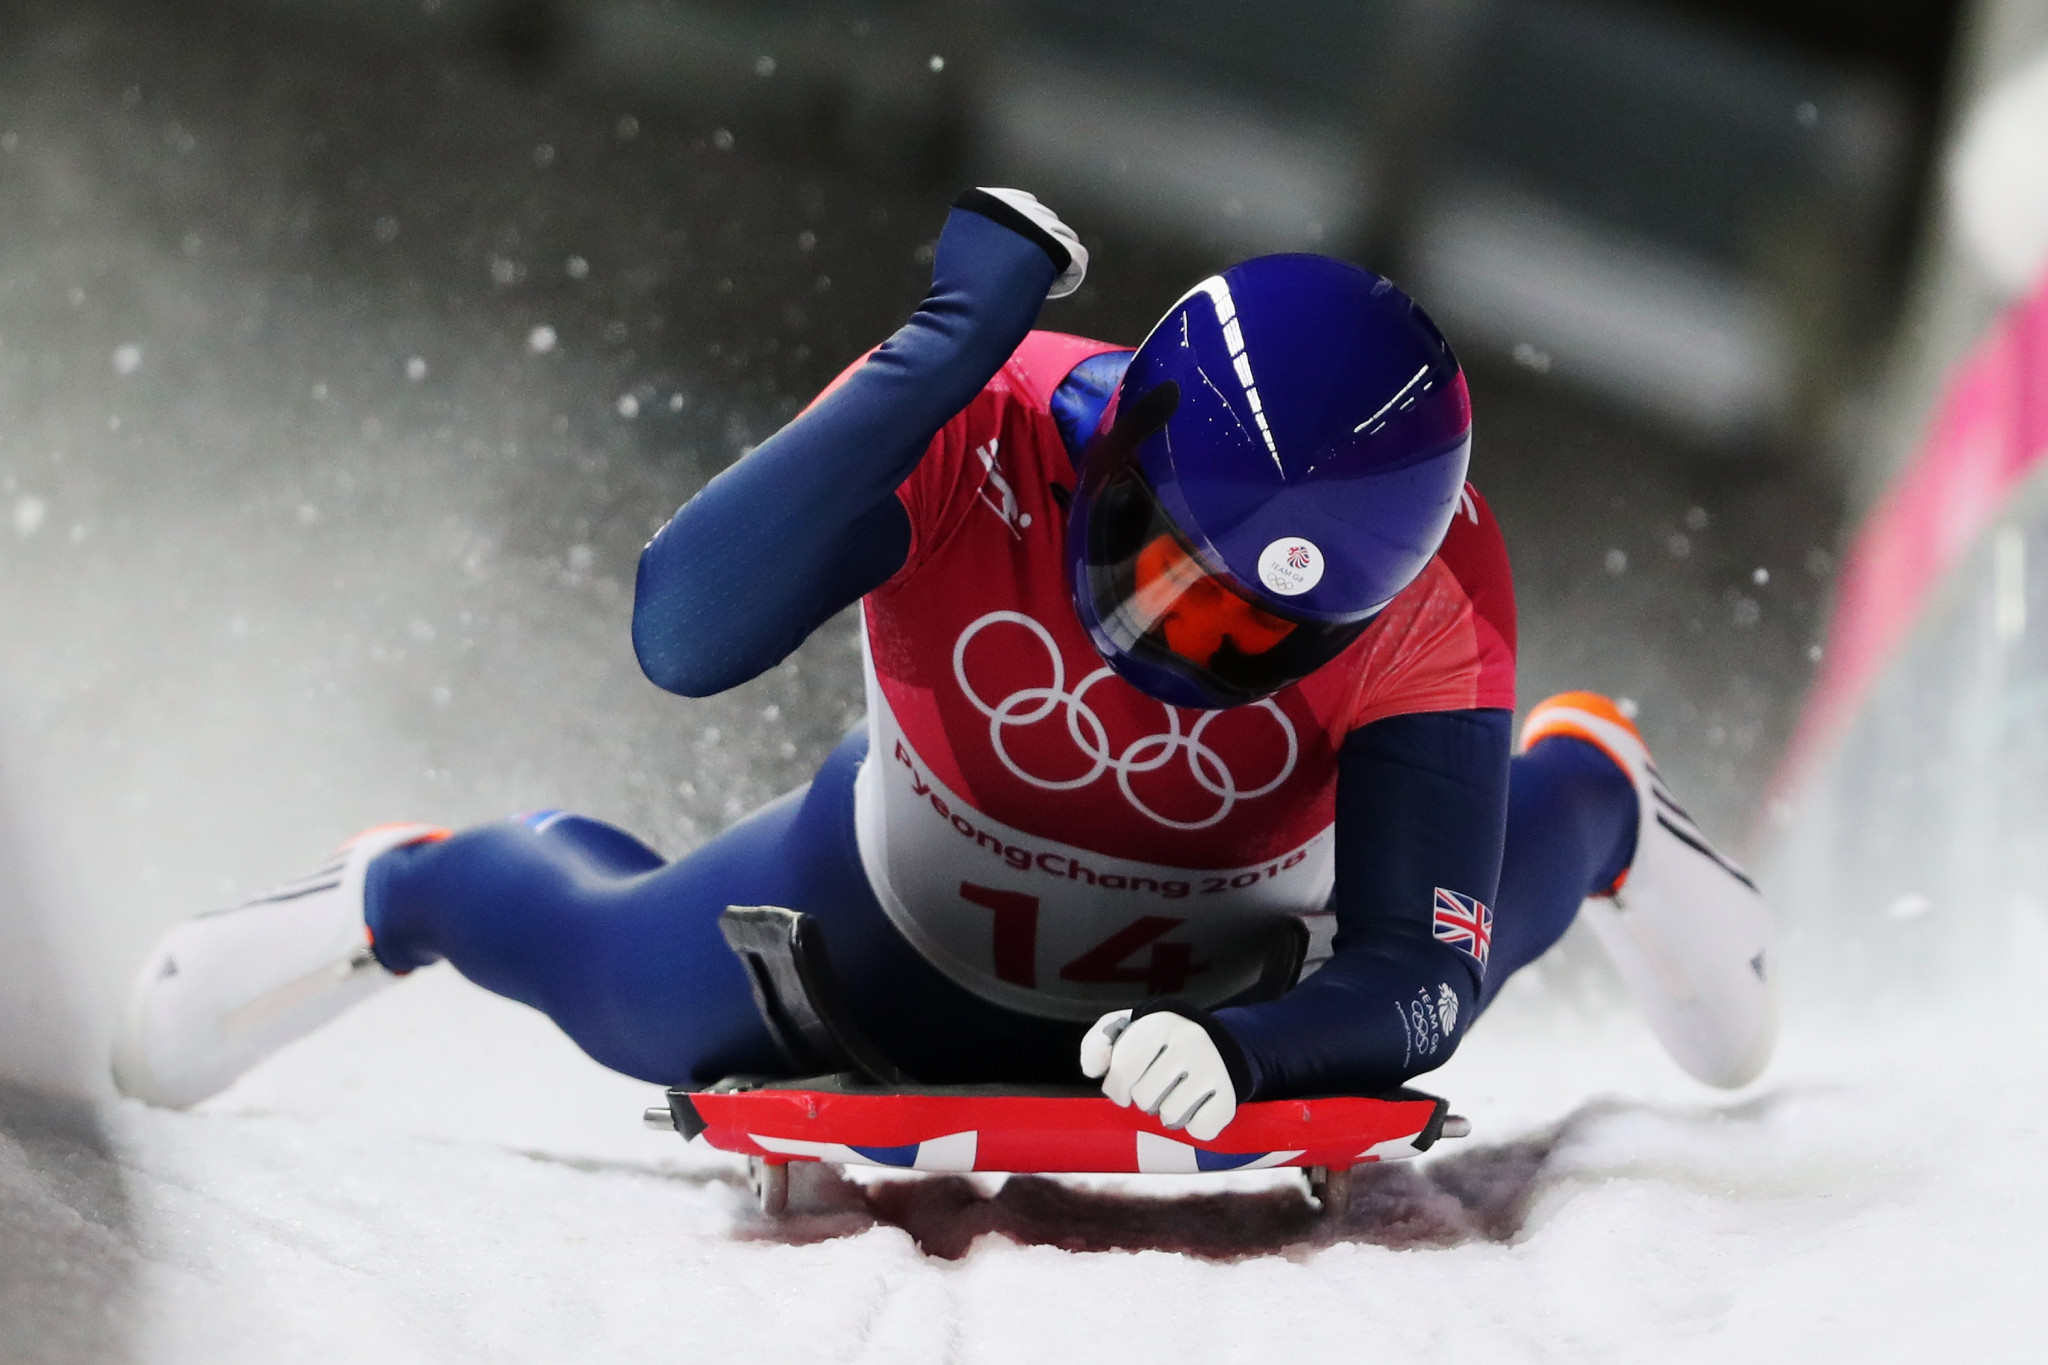 Caleb Smith helped mastermind Lizzy Yarnold's Olympic triumph in Pyeongchang, as part of his role at British Bobsleigh and Skeleton ©Getty Images